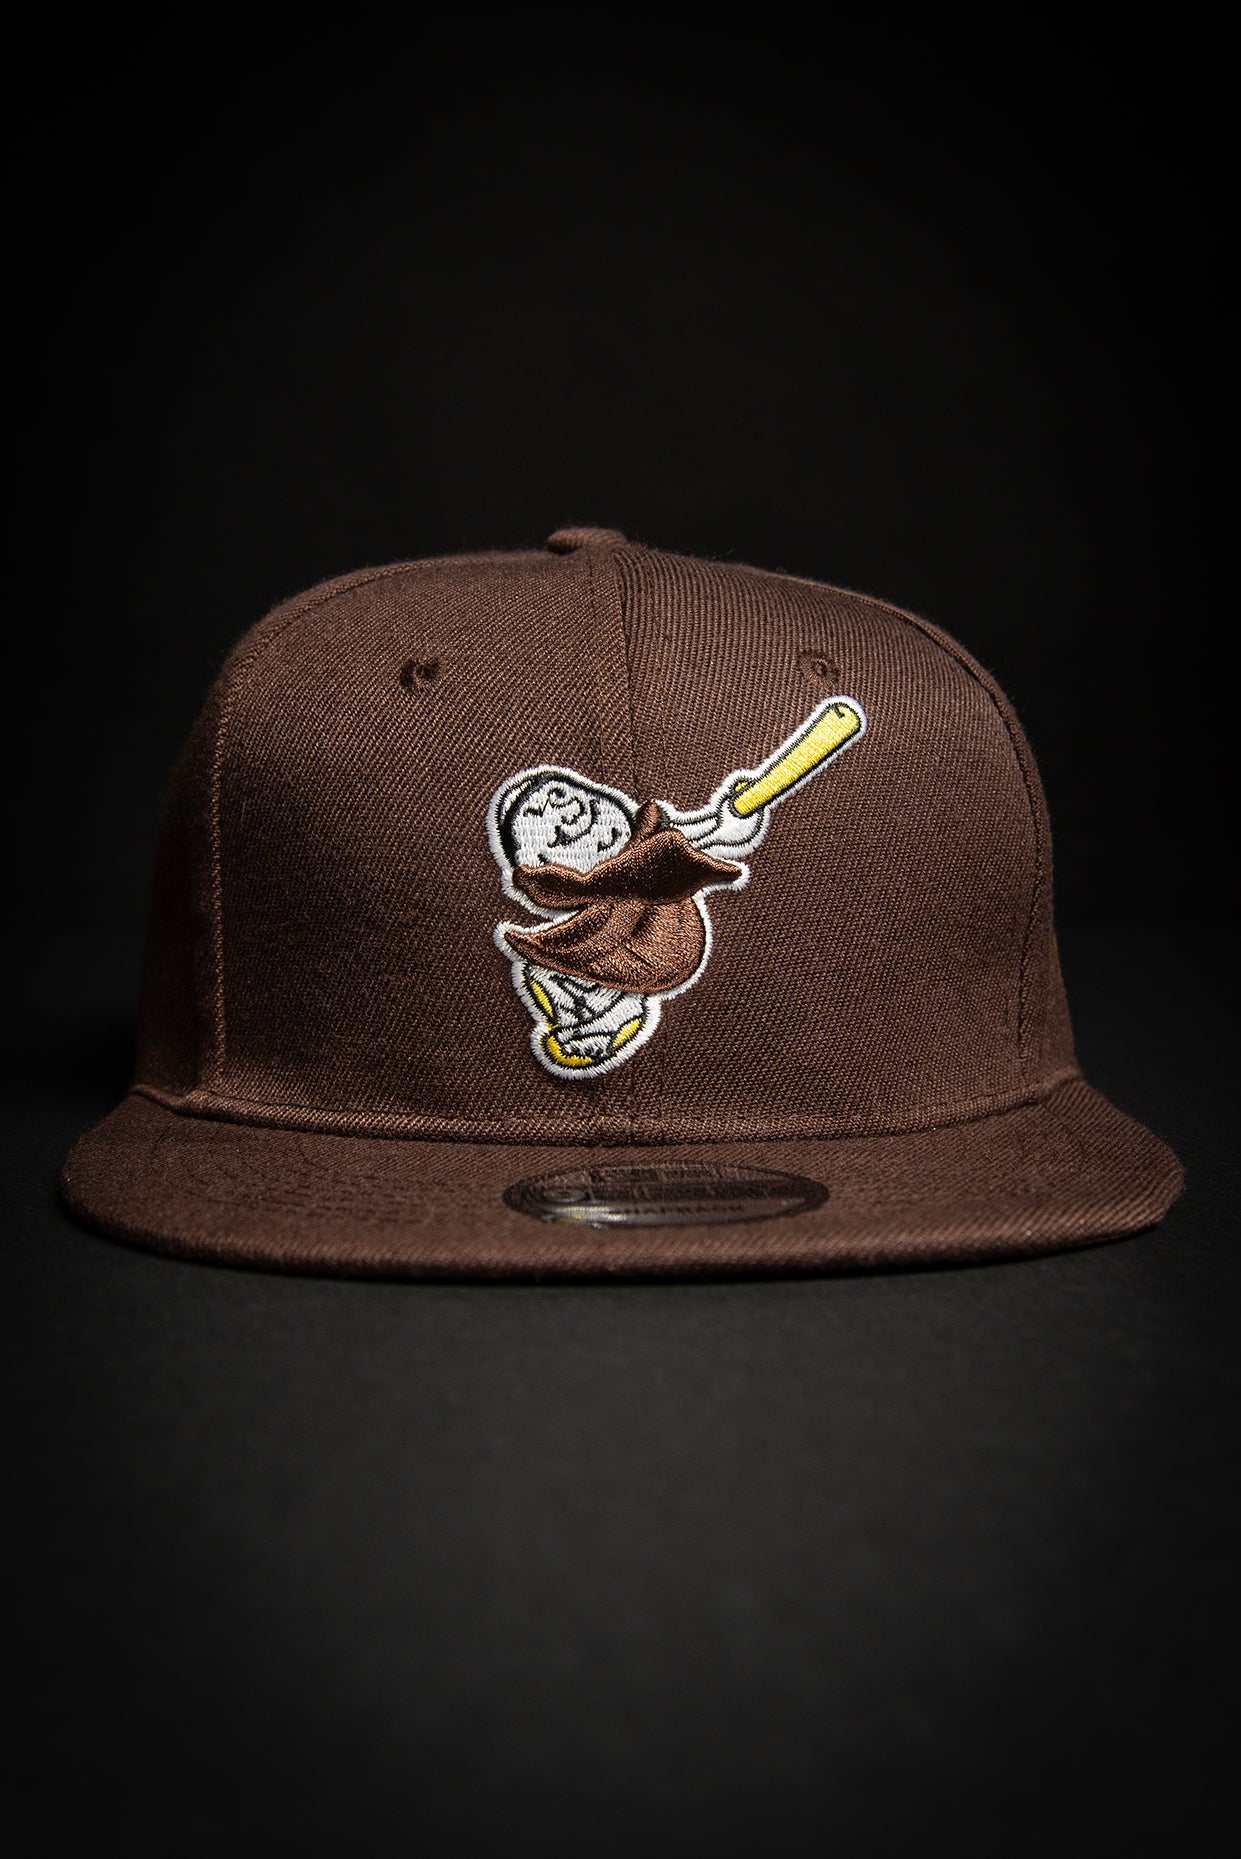 The Friar's Hat Stash # 10 - Bring Back The Brown Edition